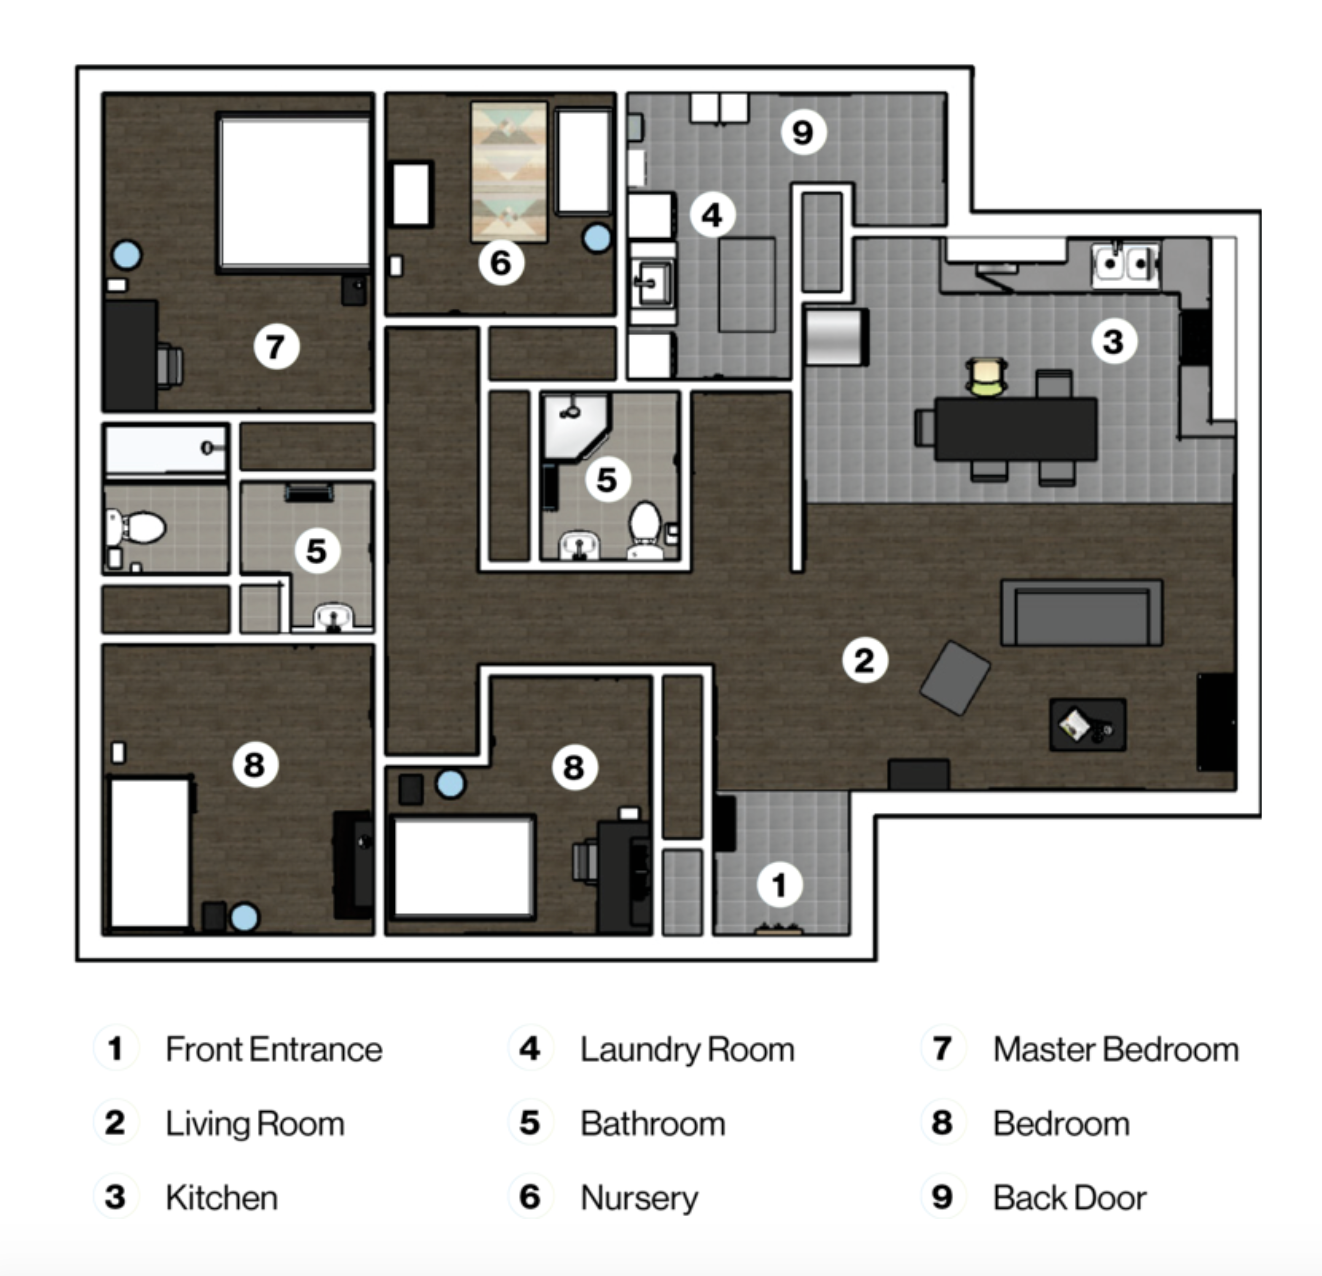 Floor plan of the Warrior Home house